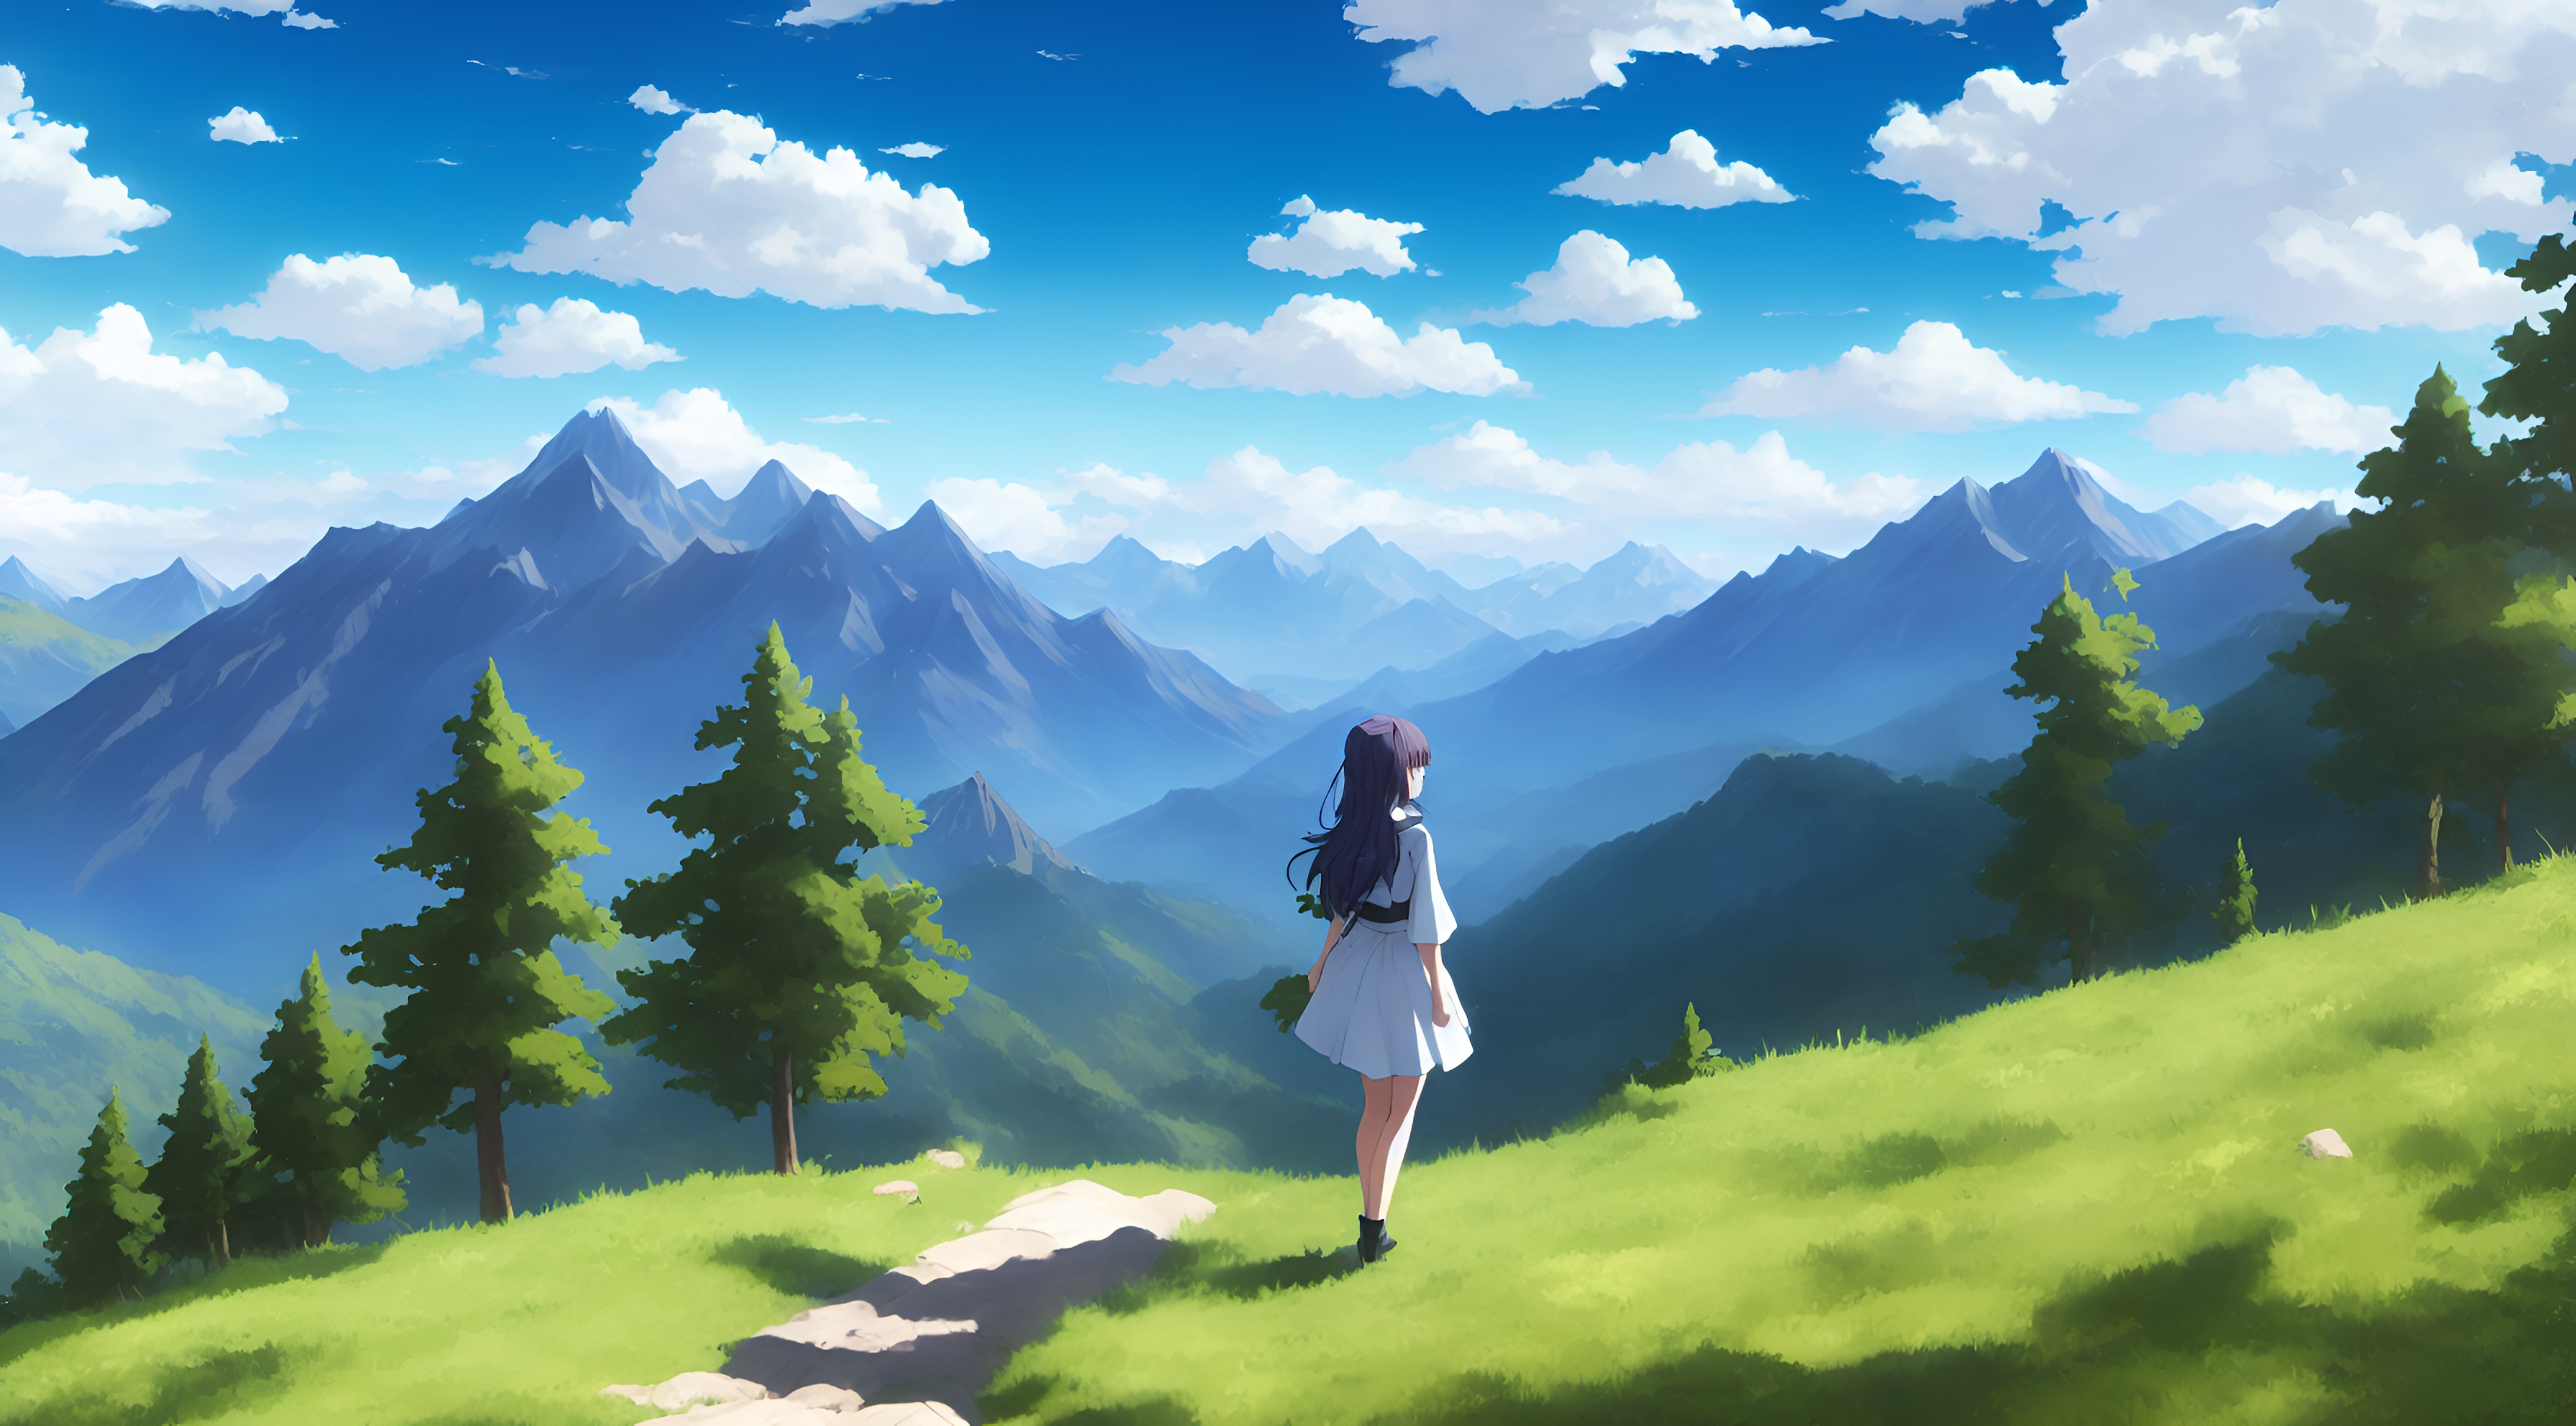 5,764 Anime Mountains Images, Stock Photos, 3D objects, & Vectors |  Shutterstock